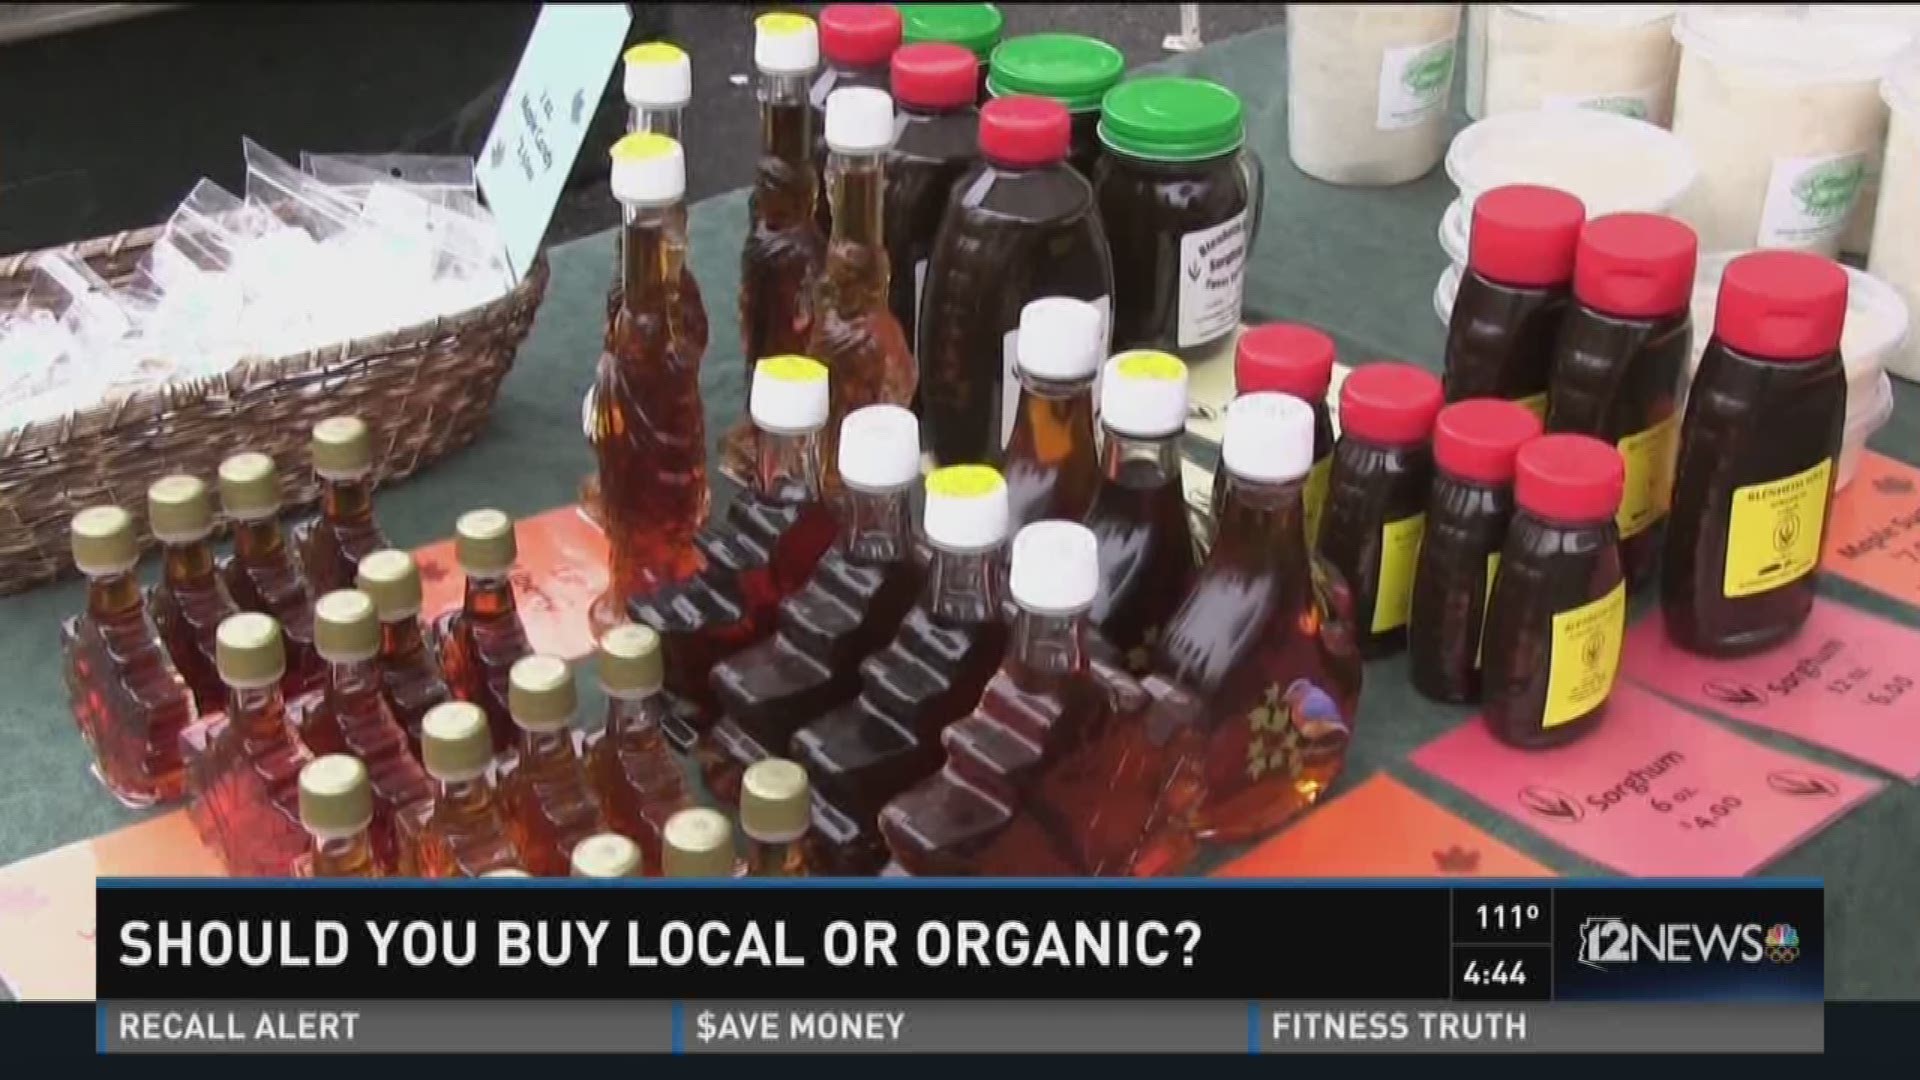 Consumer reports gives advice on how you can shop smarter when it comes to deciding between local or organic